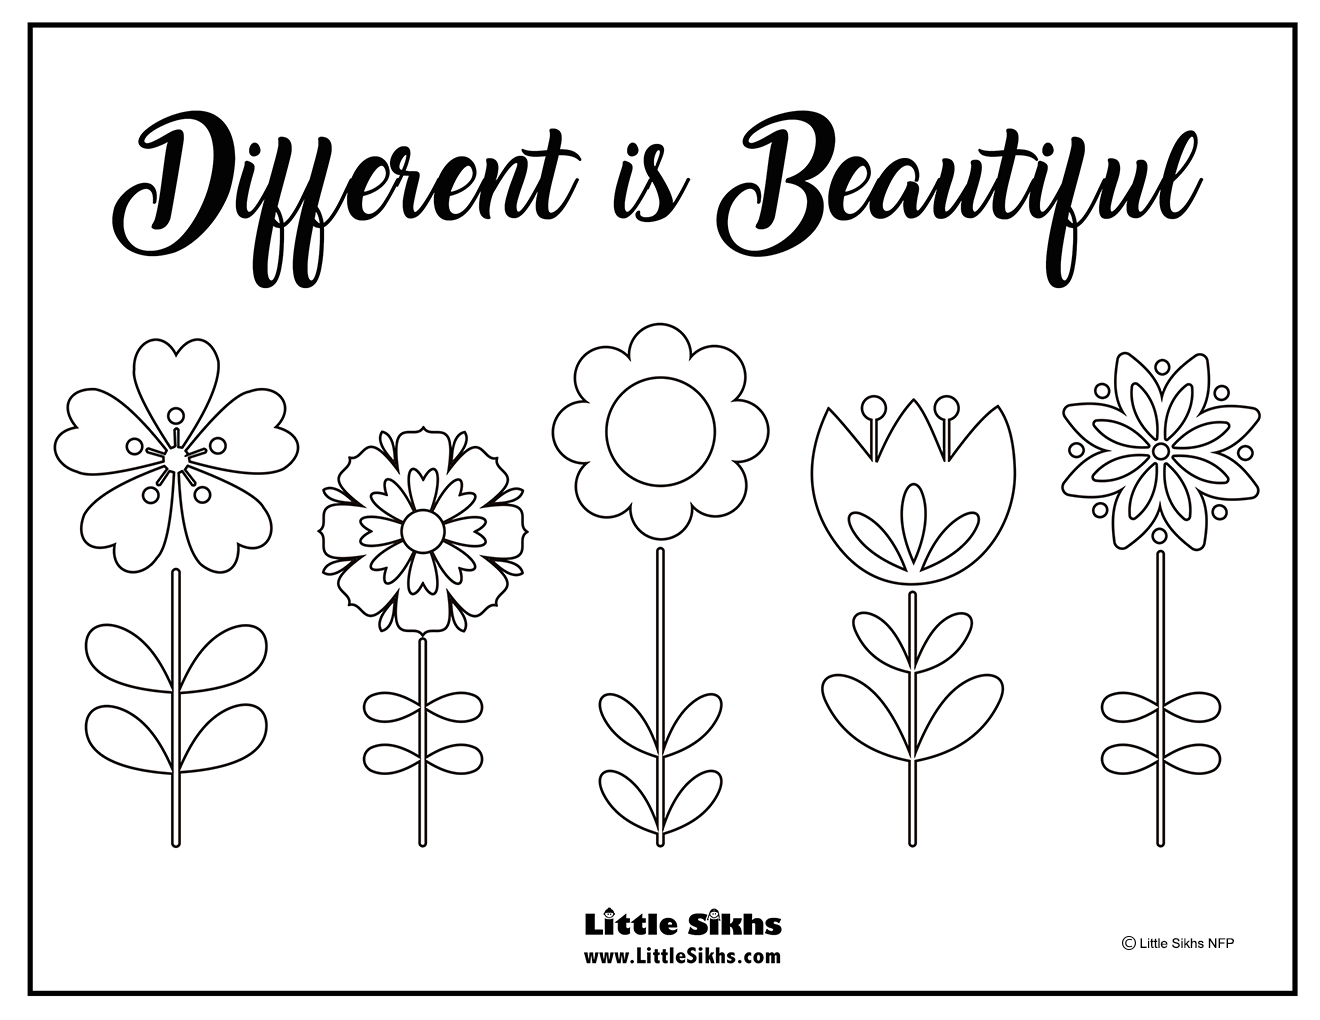 Different is Beautiful (Diversity Coloring Page)